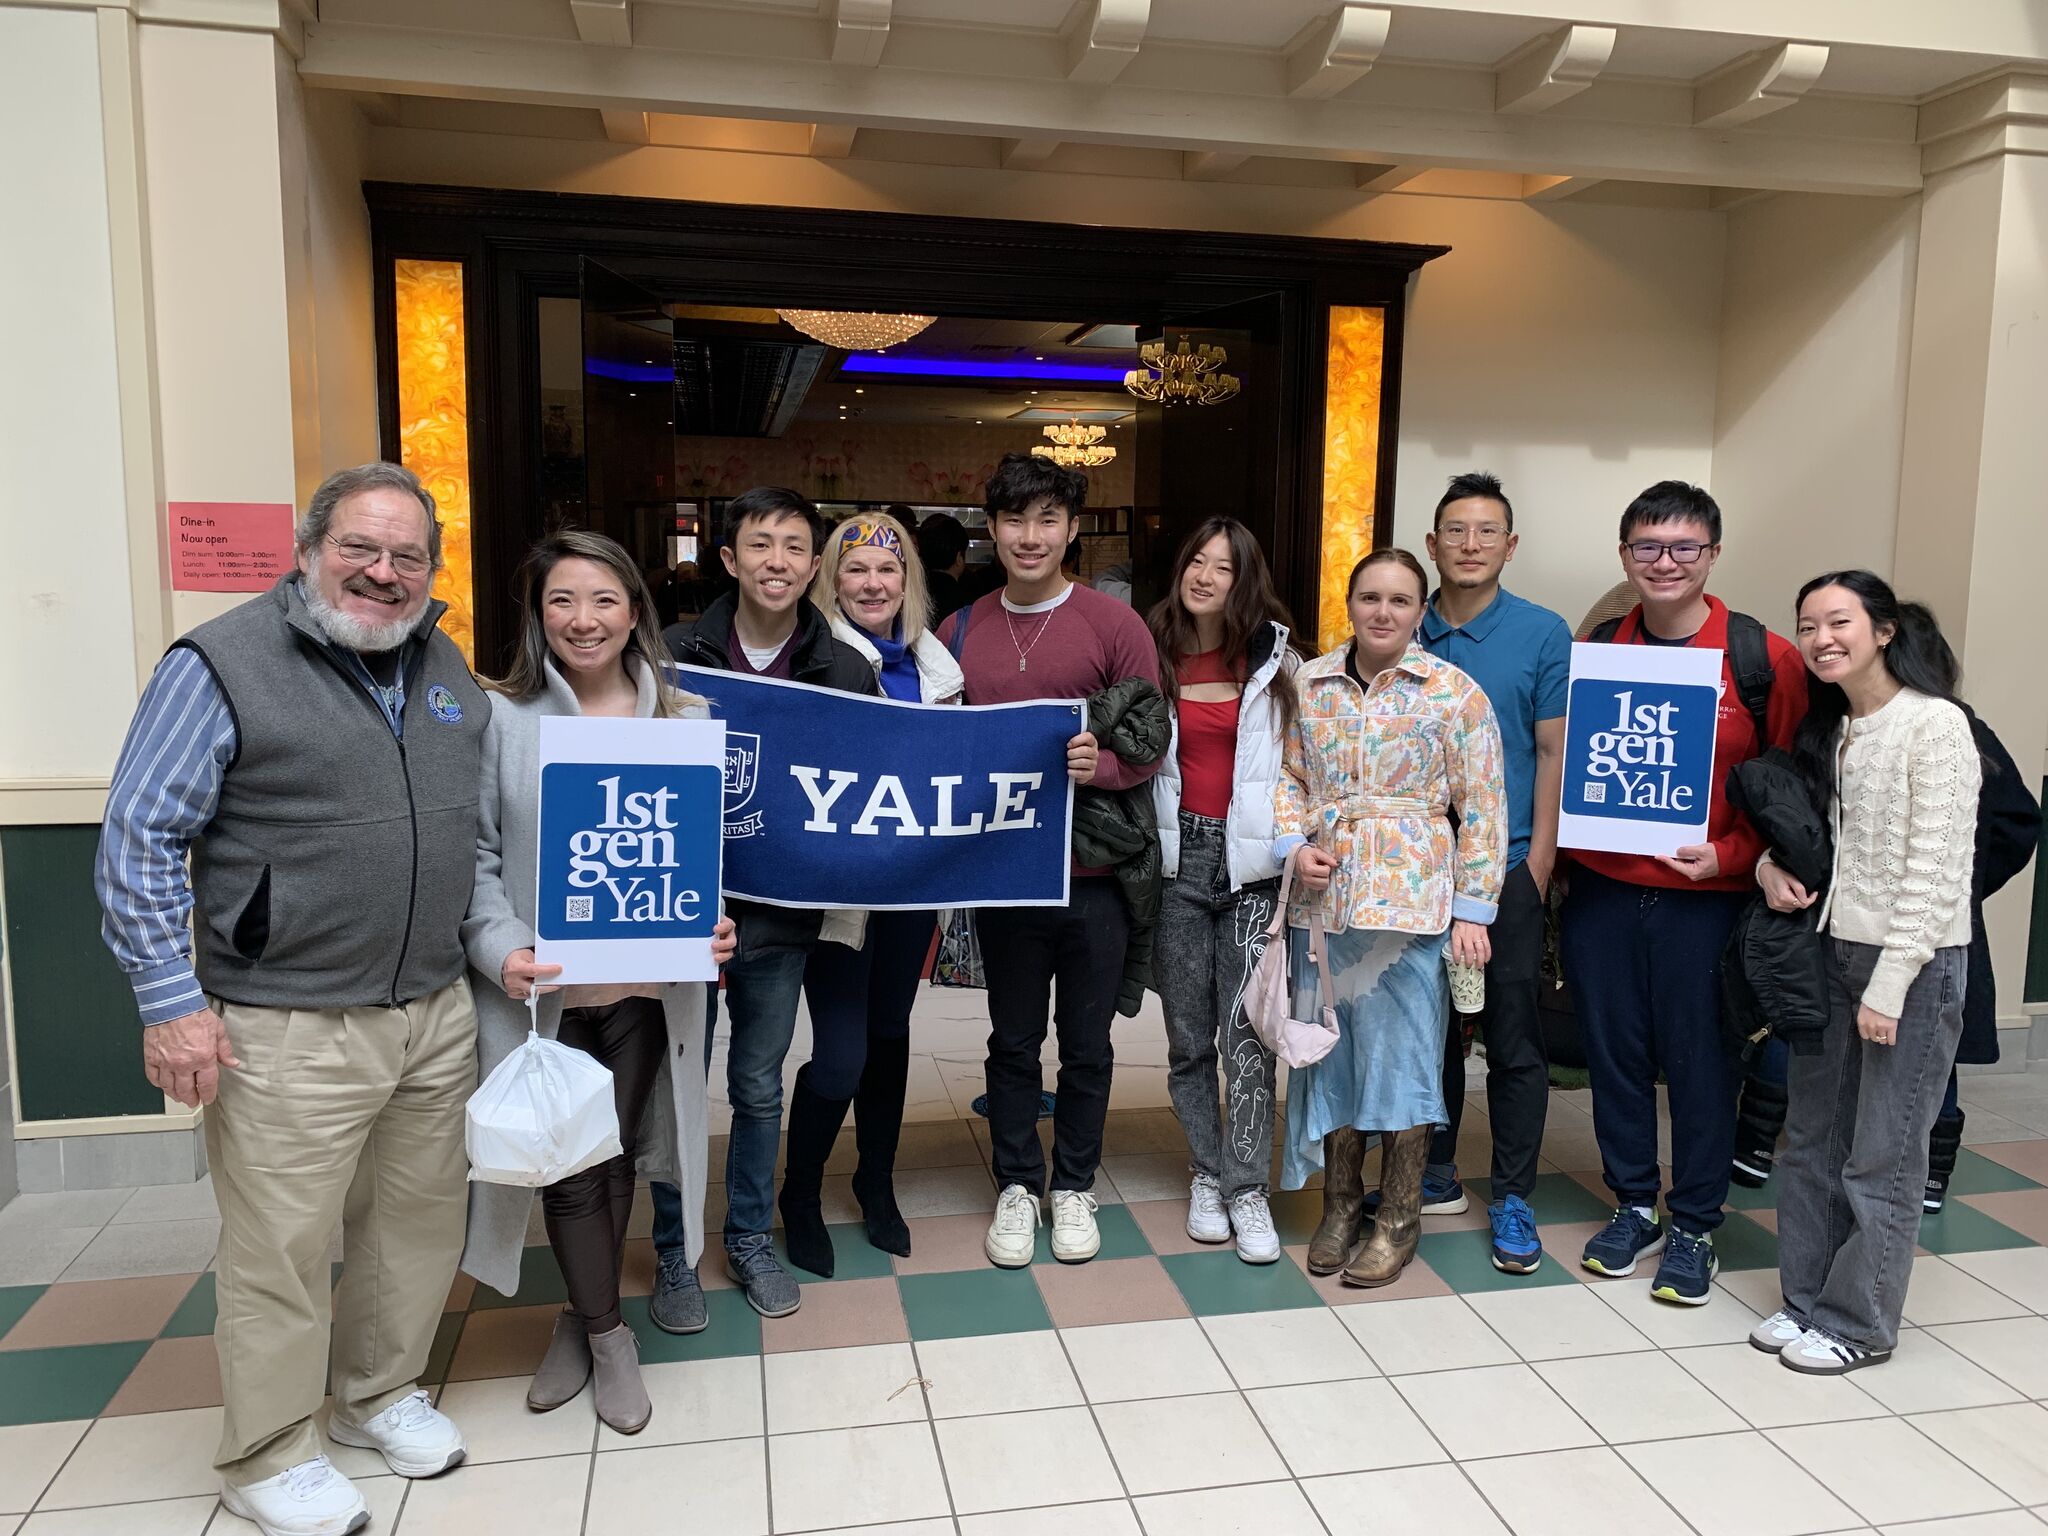 Ten alums stand outside a restaurant and hold Yale and 1stGenYale signs